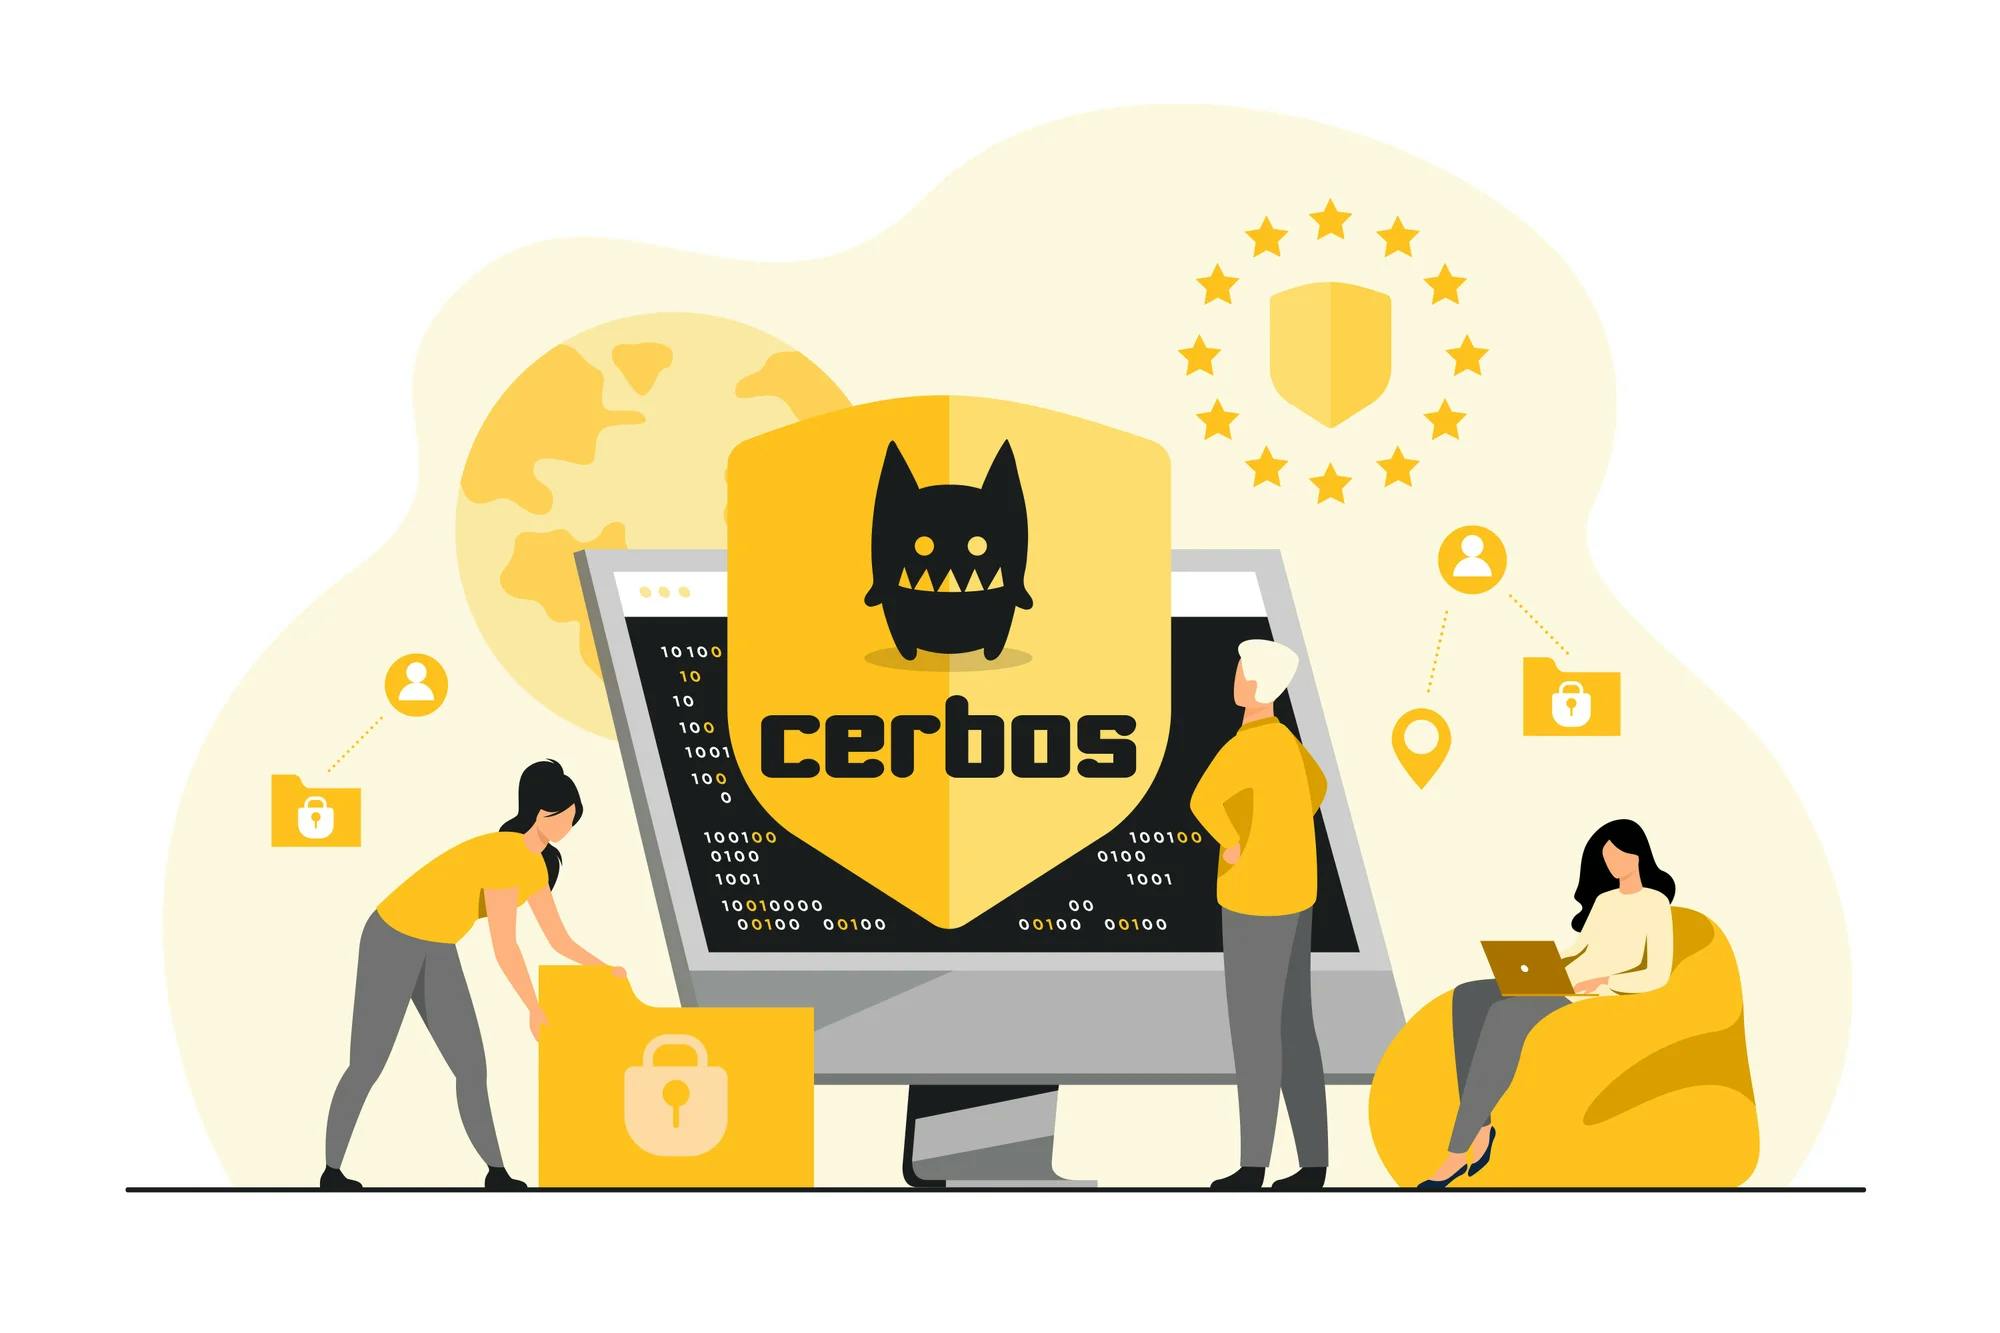 Cerbos: Why and what